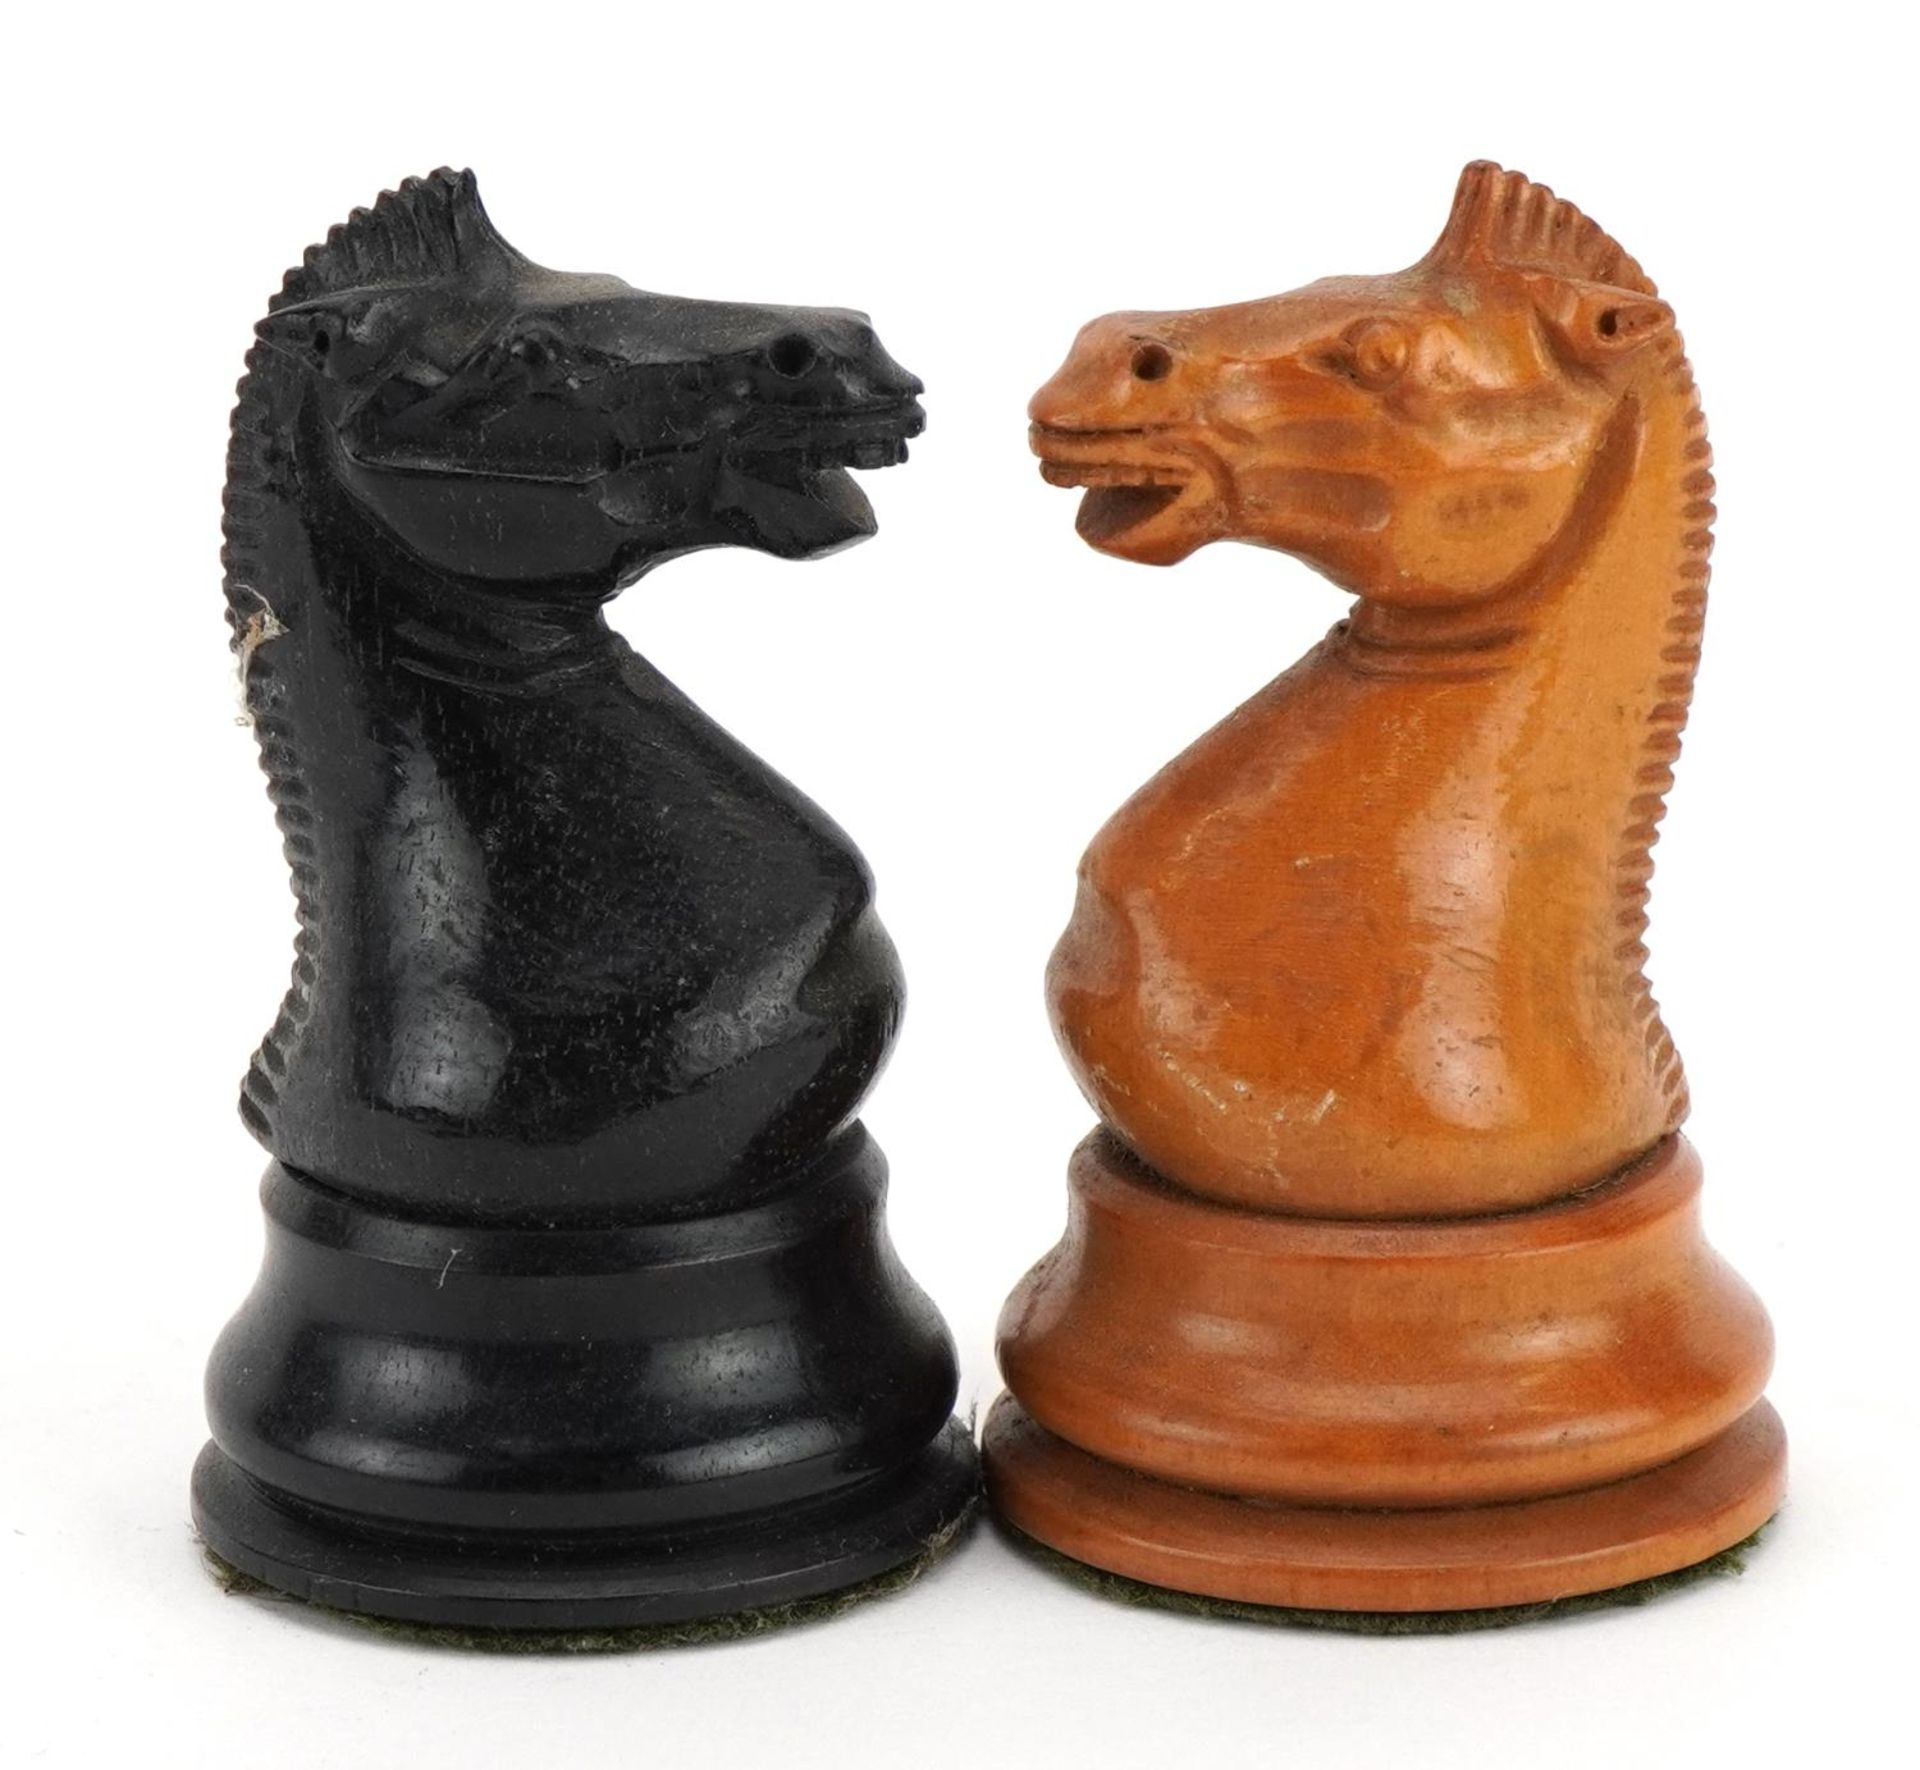 Jaques of London, boxwood and ebony Staunton pattern chess set, the largest pieces each 9cm high - Image 4 of 7